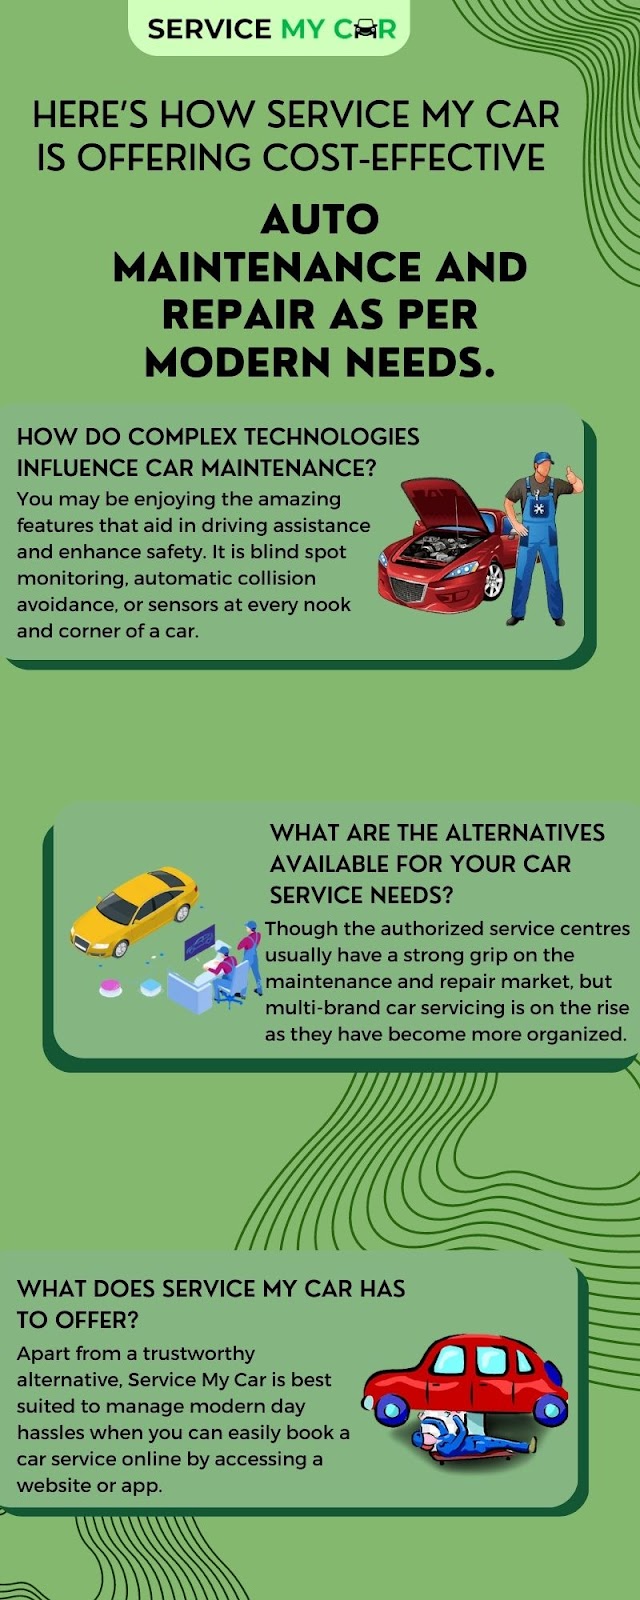 Here’s How Service My Car Offering Cost-Effective Auto Maintenance And Repair As Per Modern Needs.